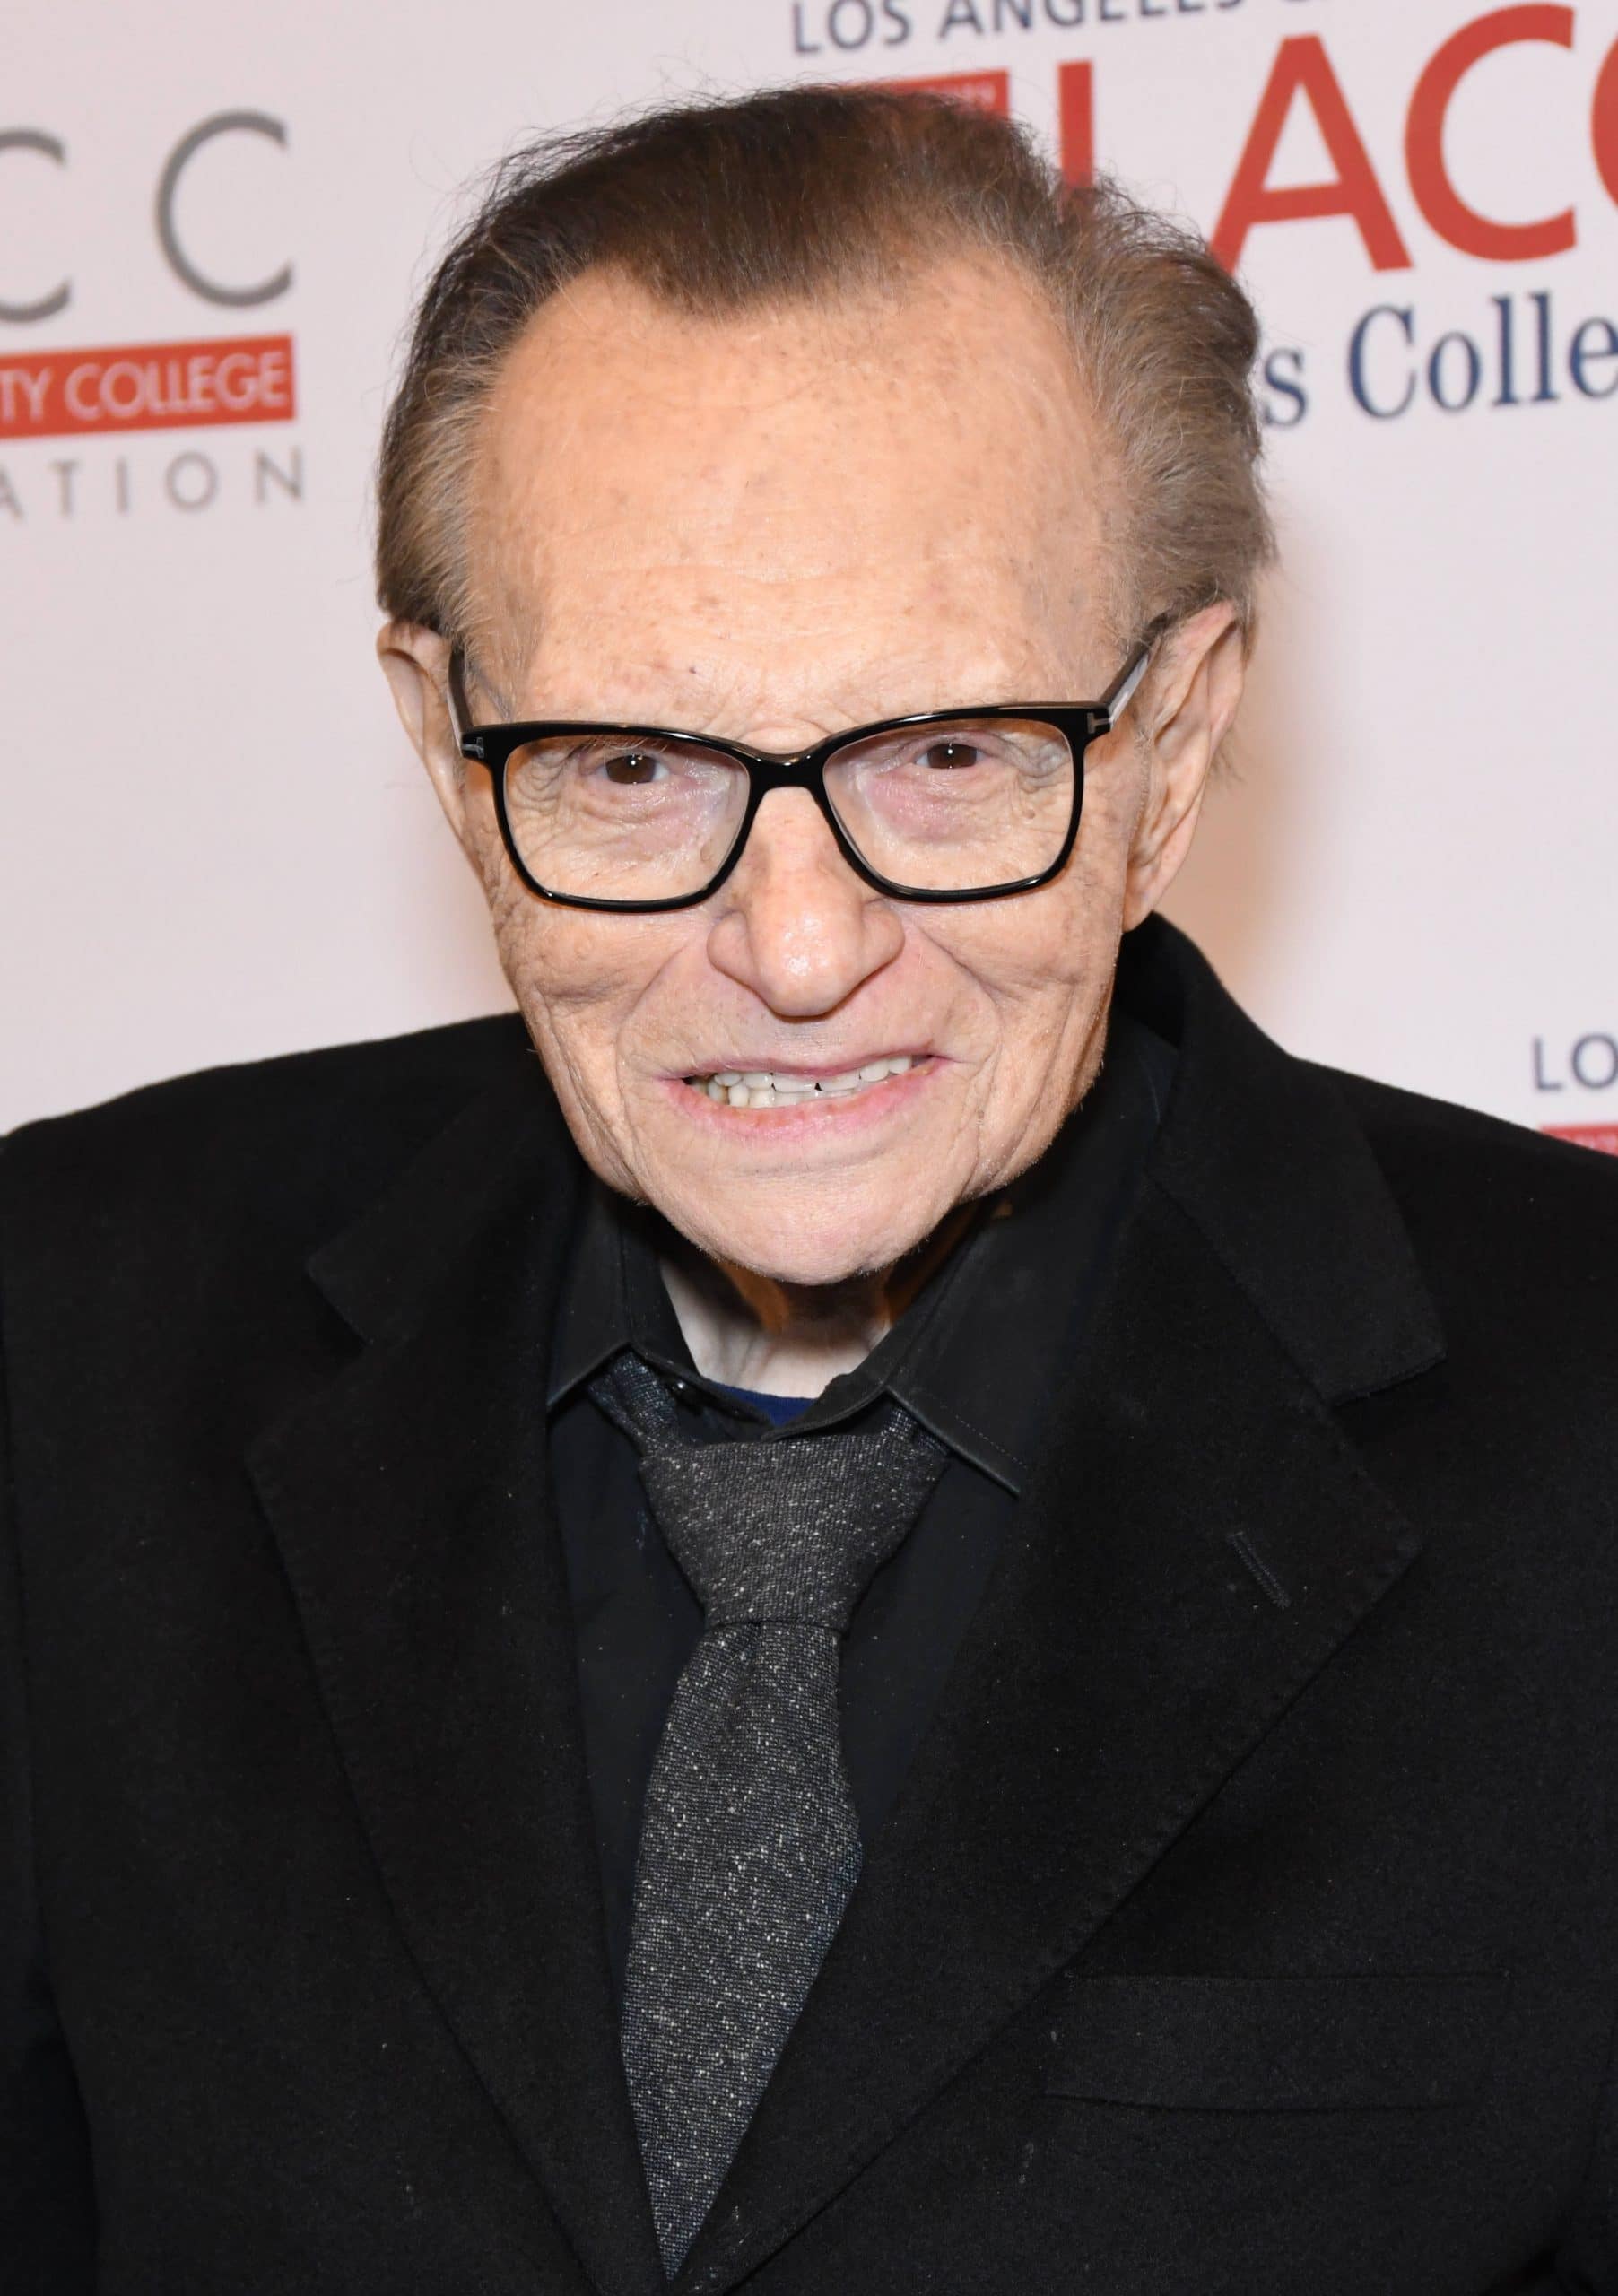 two of larry king's kids have died within the past month